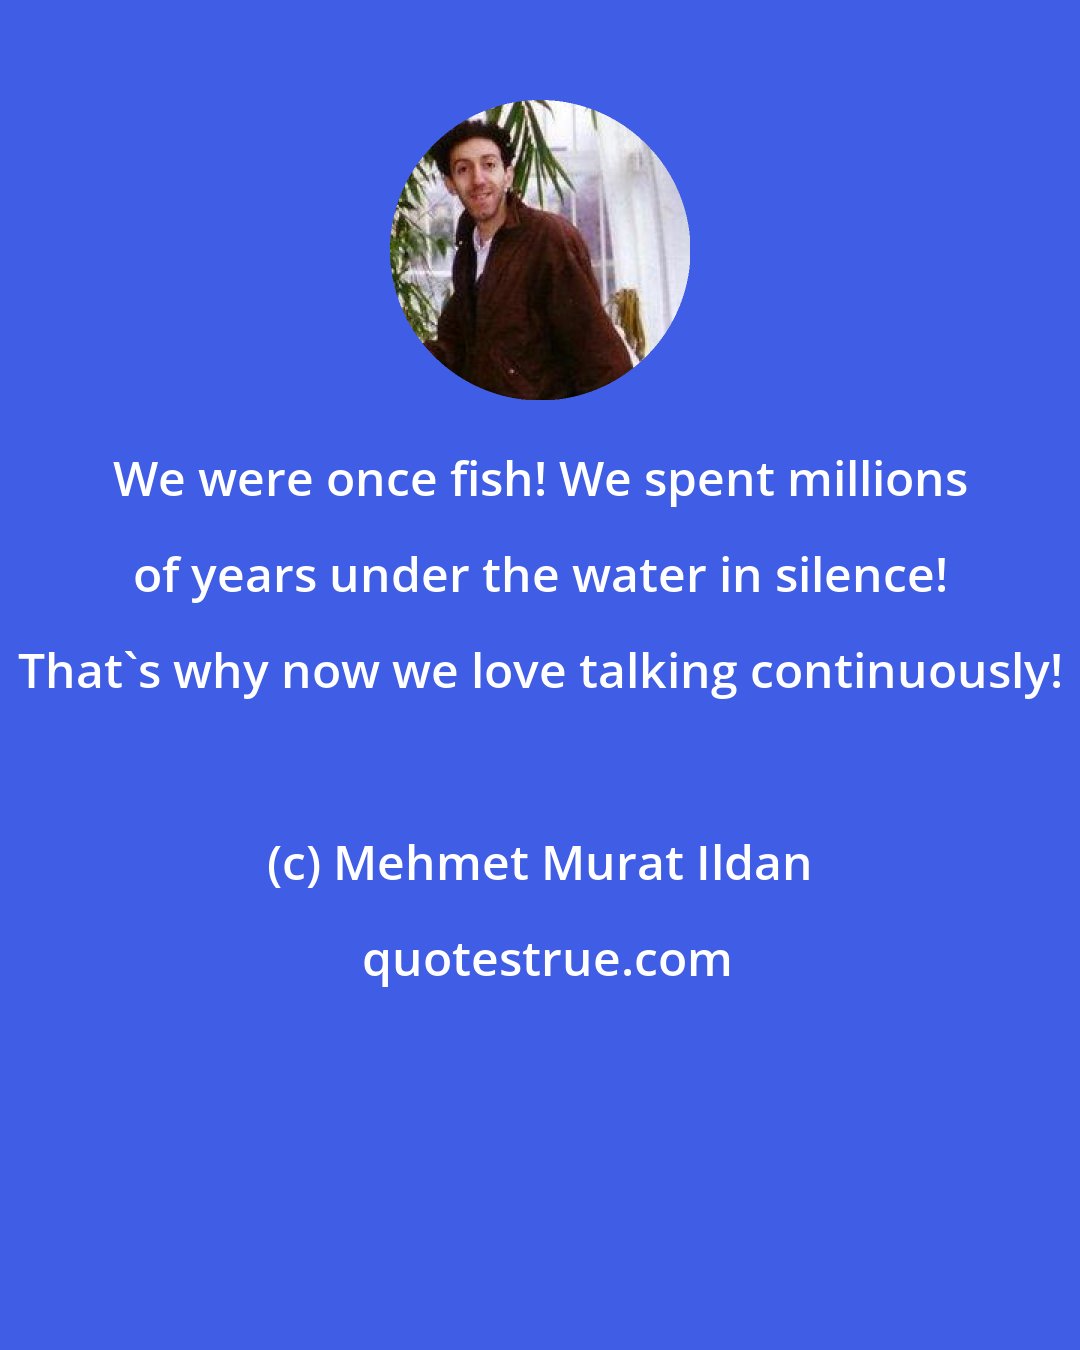 Mehmet Murat Ildan: We were once fish! We spent millions of years under the water in silence! That's why now we love talking continuously!